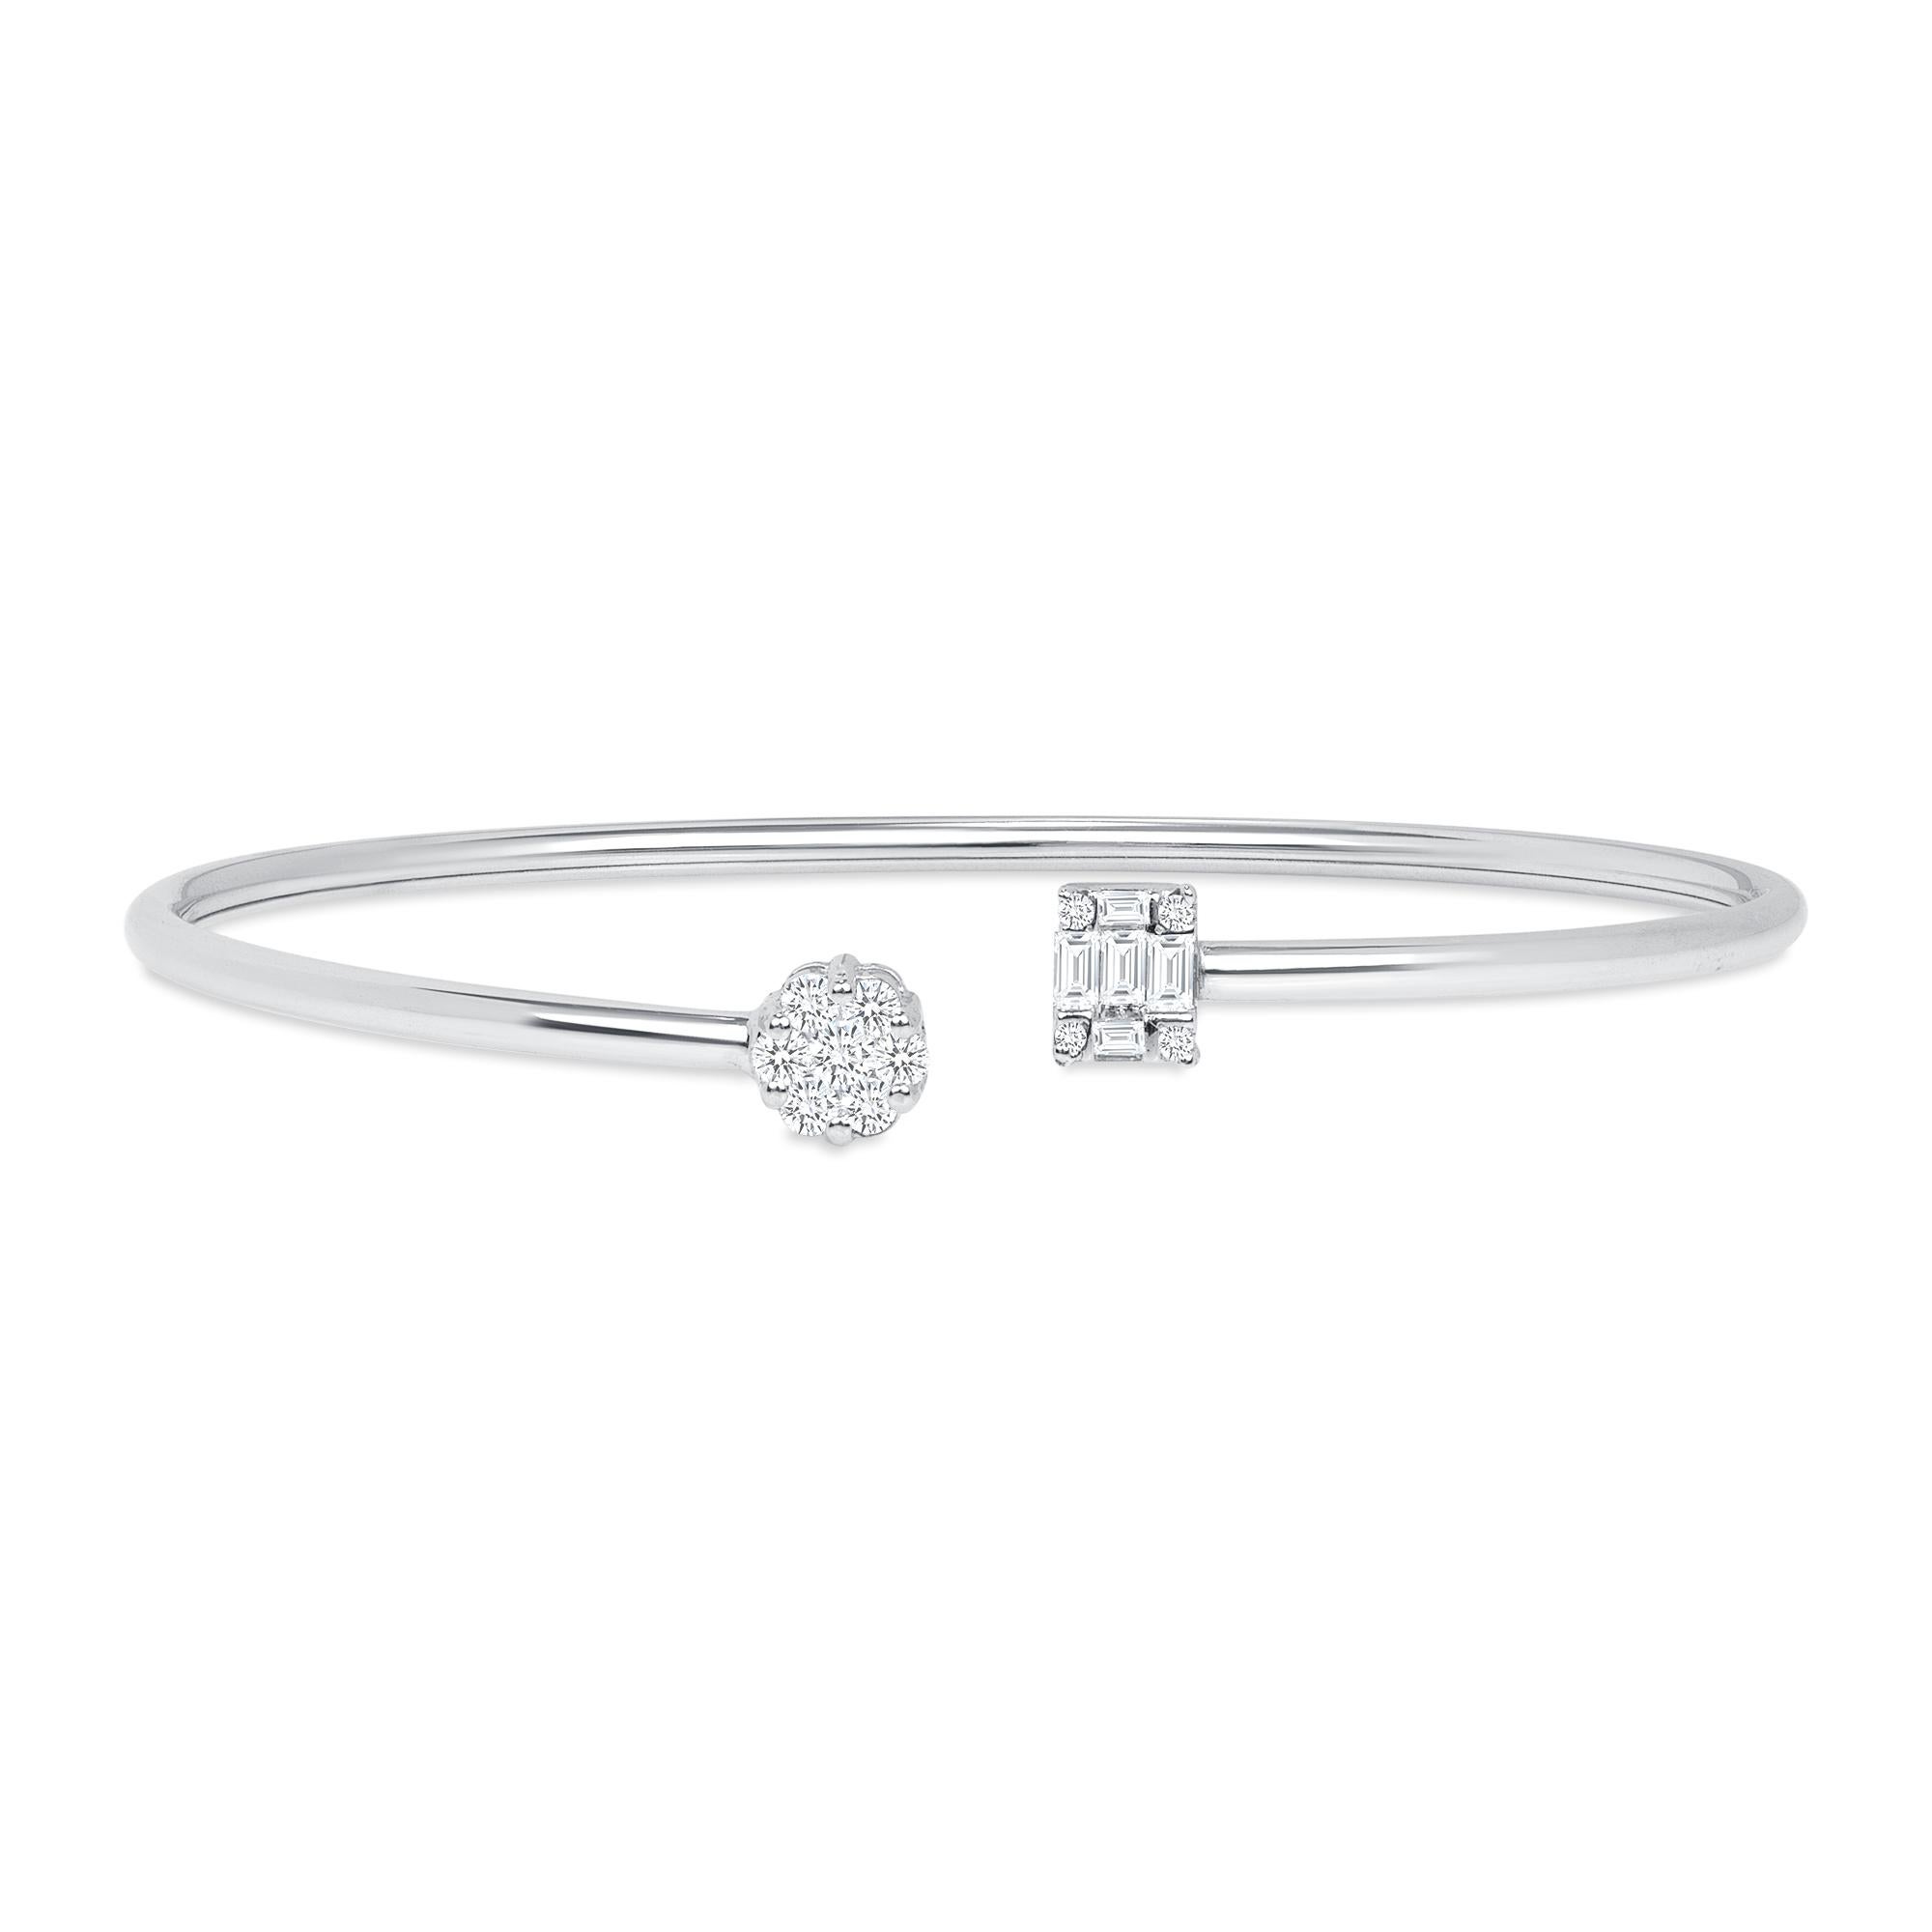 18k White Gold Diamond Cuff Bangle Bracelet, 0.50 ct Diamond Bracelet, Open Cuff Bangle, Illusion Bracelet

Description

This is a beautiful diamond design 18k Gold bangle. encrusted with Round and Baguette Natural Diamonds. The illusion provided by